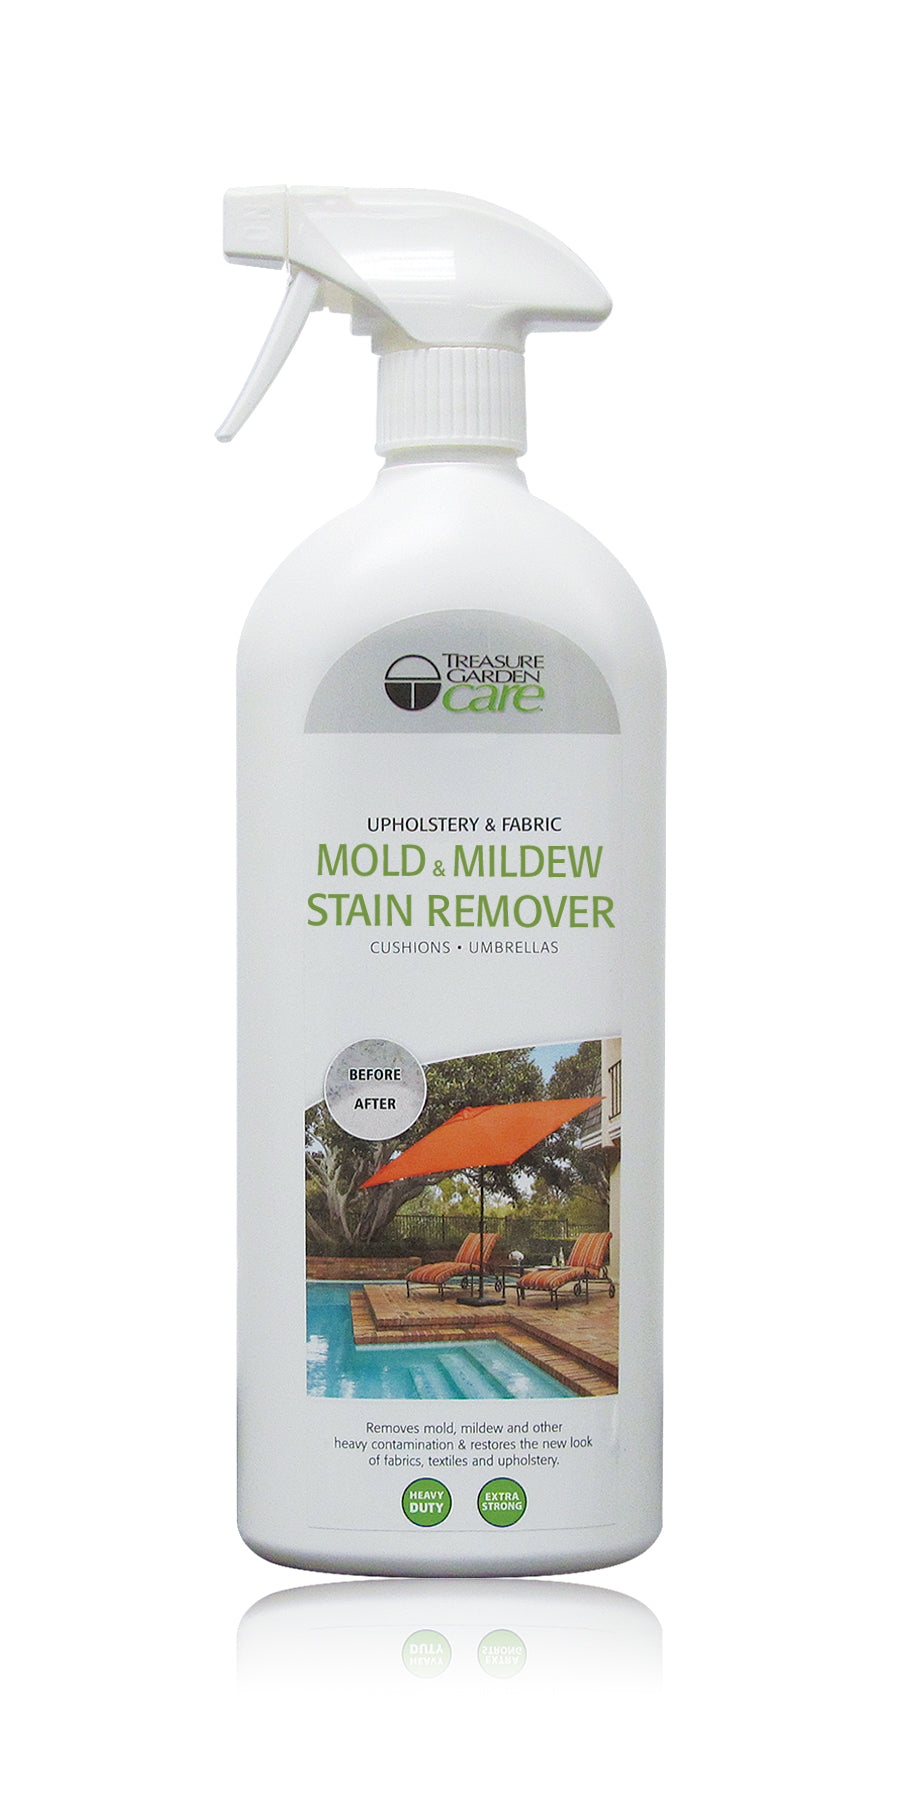 Mold and Mildew Stain Remover by Treasure Garden